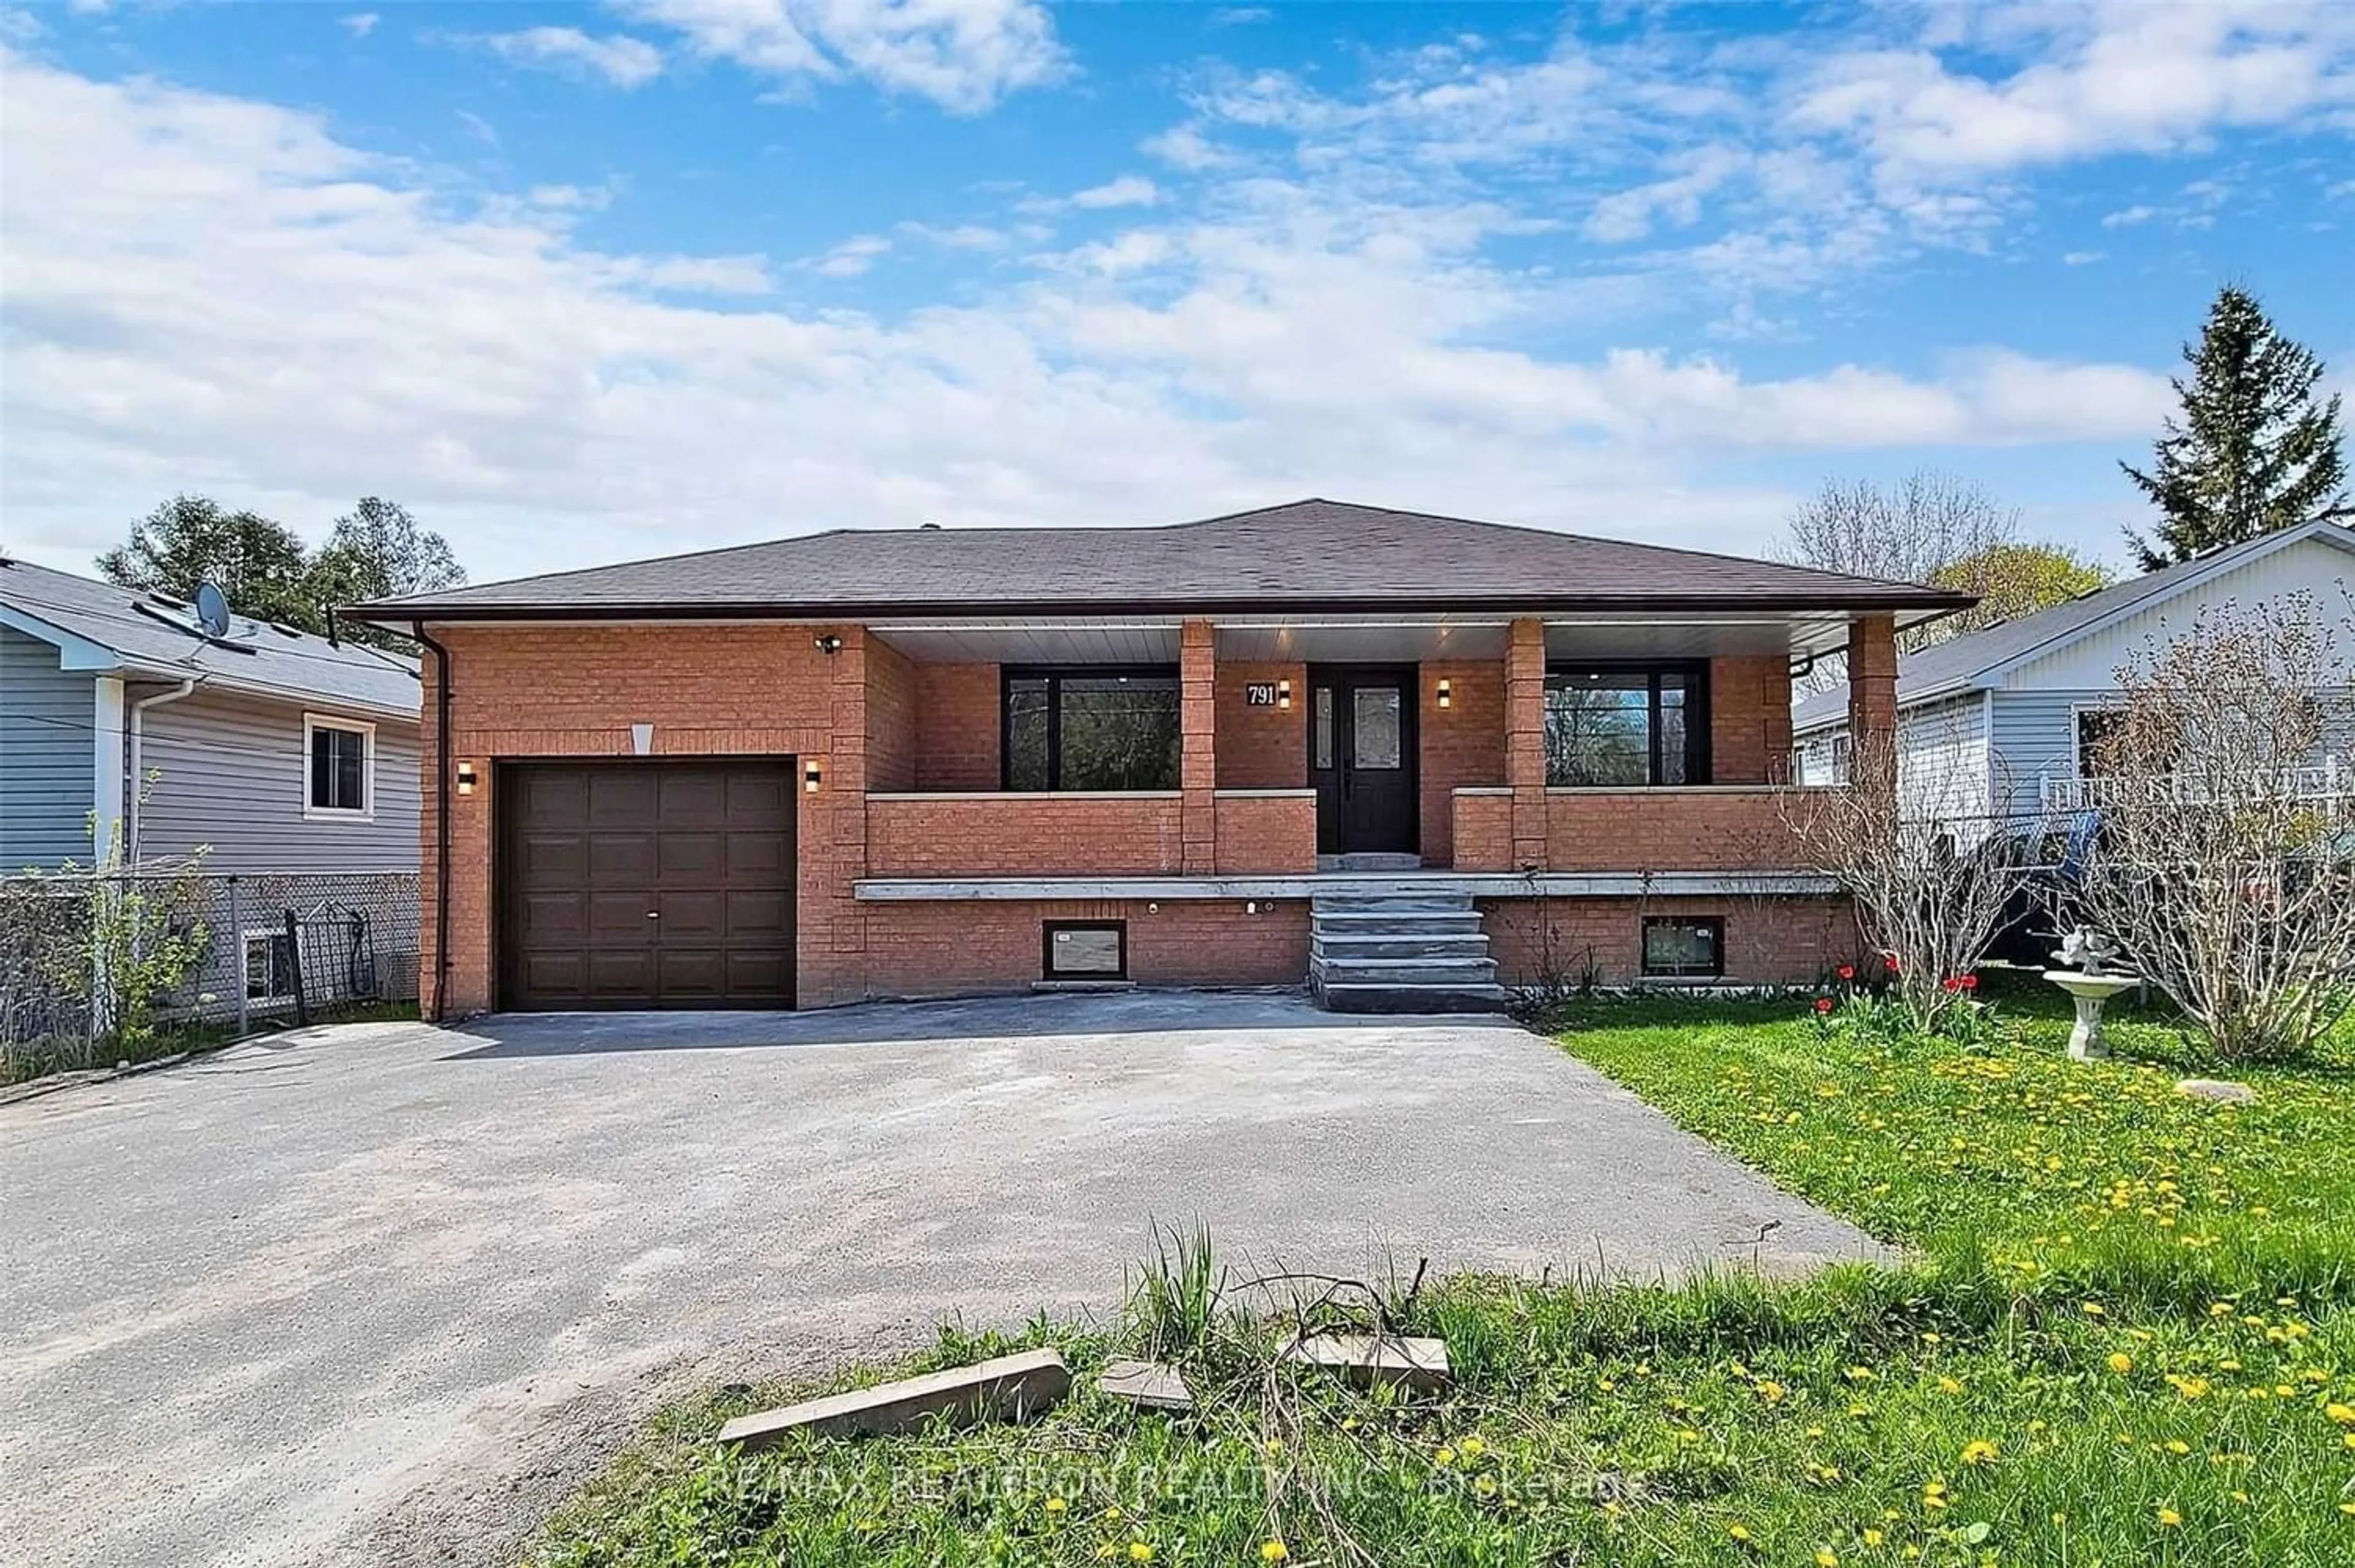 Home with brick exterior material for 791 10th Line, Innisfil Ontario L9S 3N3